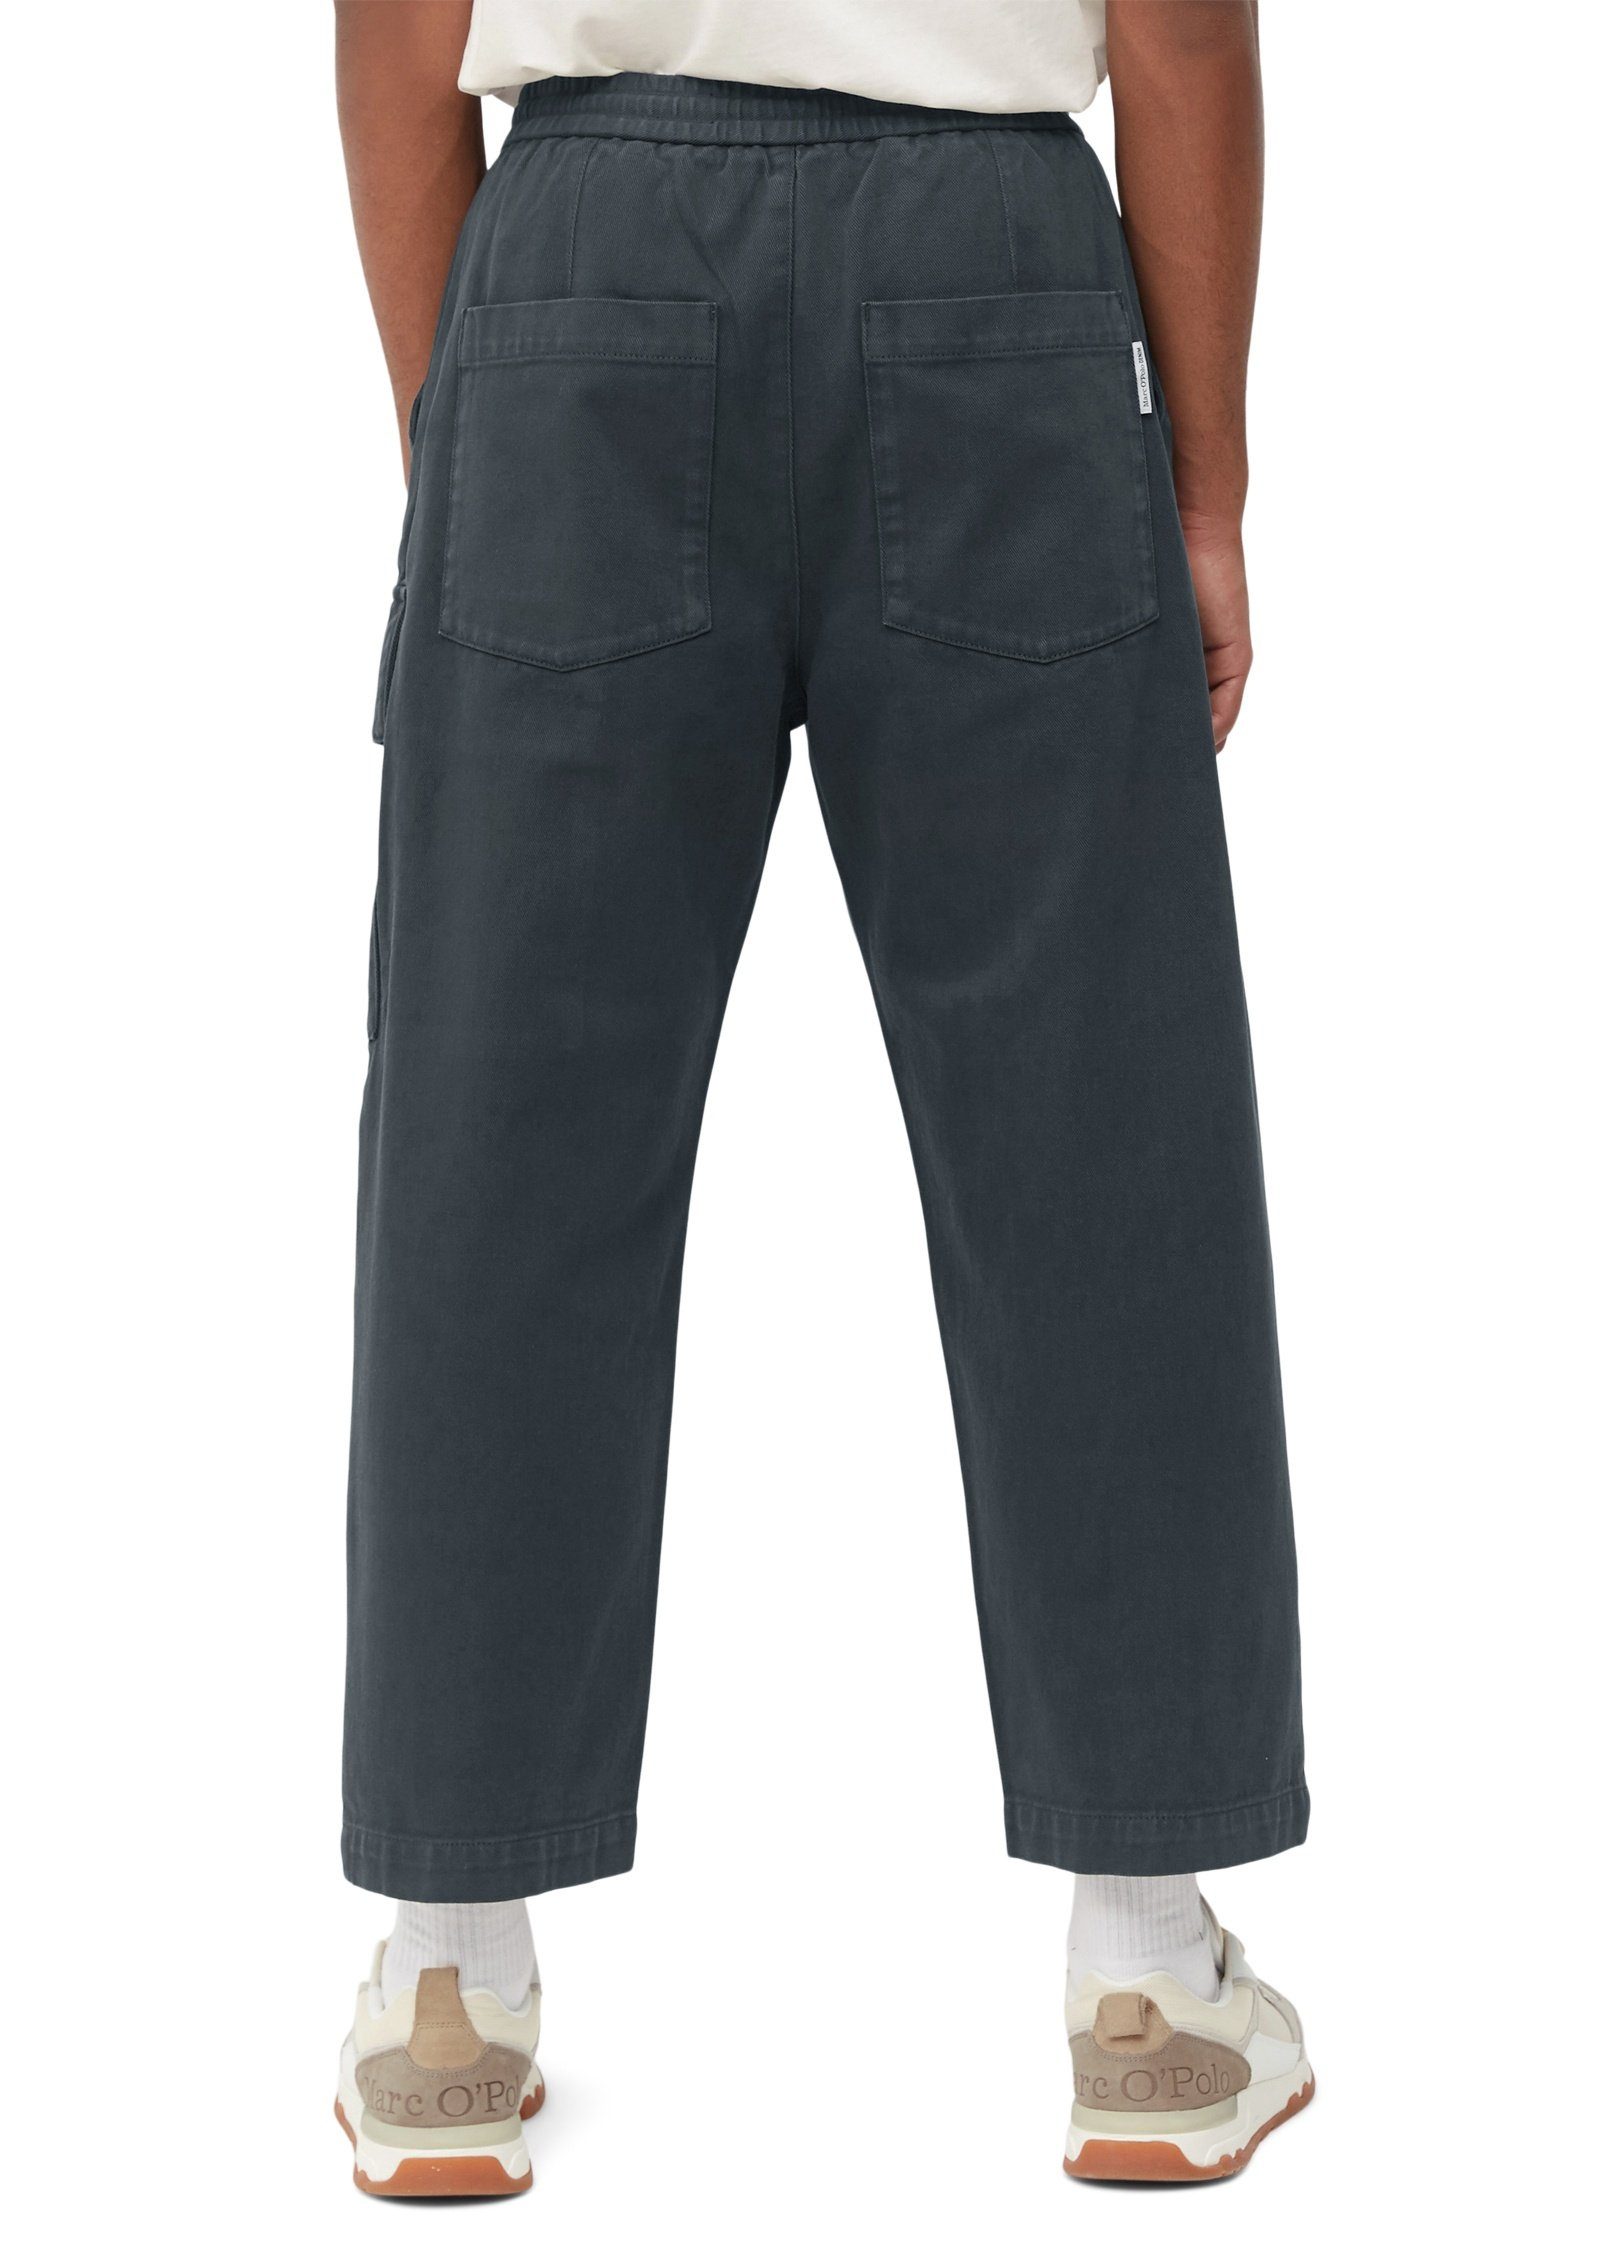 Twill-Qualität DENIM in Marc aus Chinohose robuster O'Polo